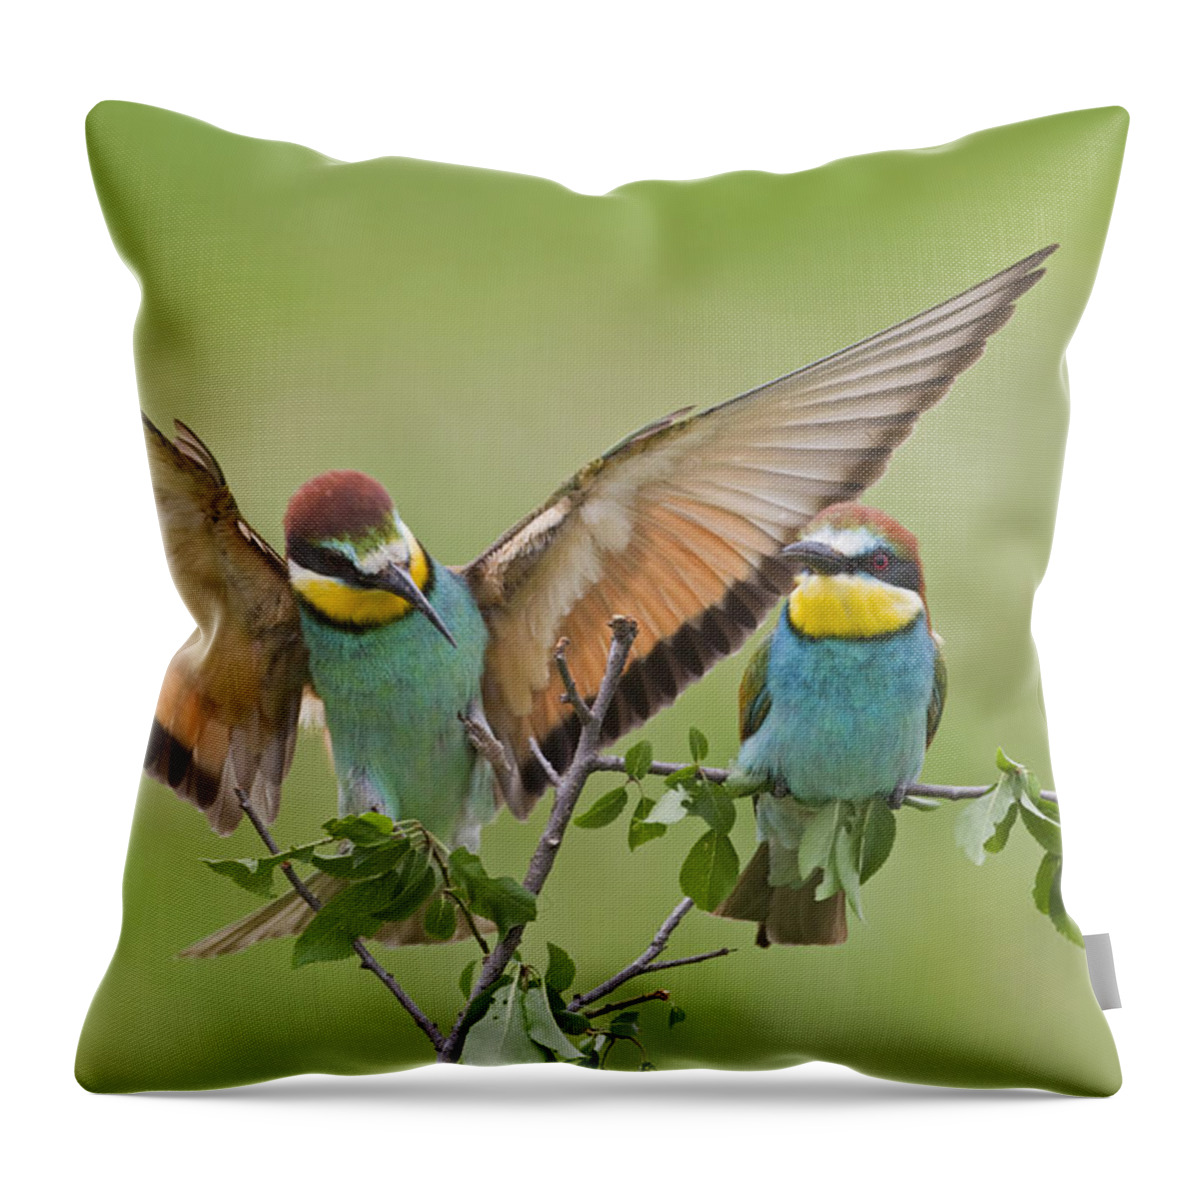 Flpa Throw Pillow featuring the photograph European Bee-eaters Bulgaria by Dickie Duckett